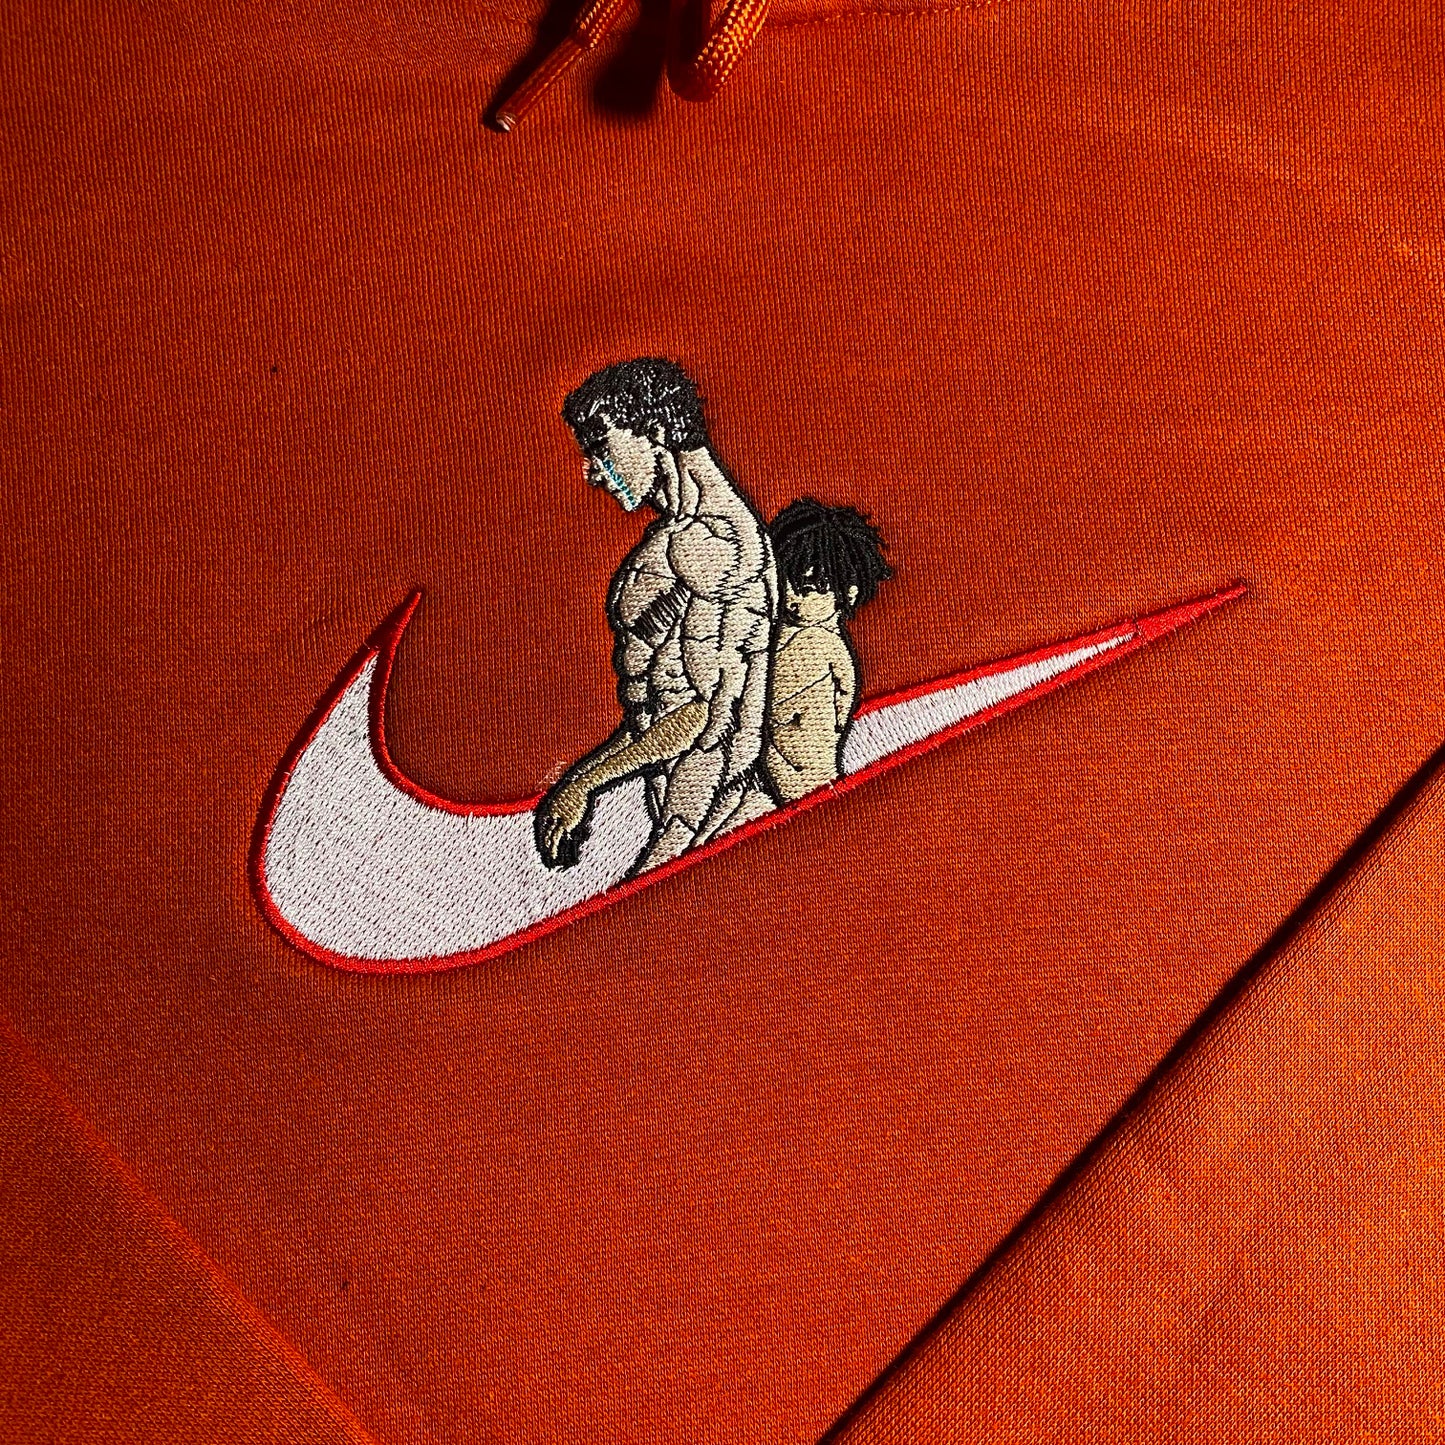 LIMITED Berserk and Casca Gyat EMBROIDERED GYM HOODIE